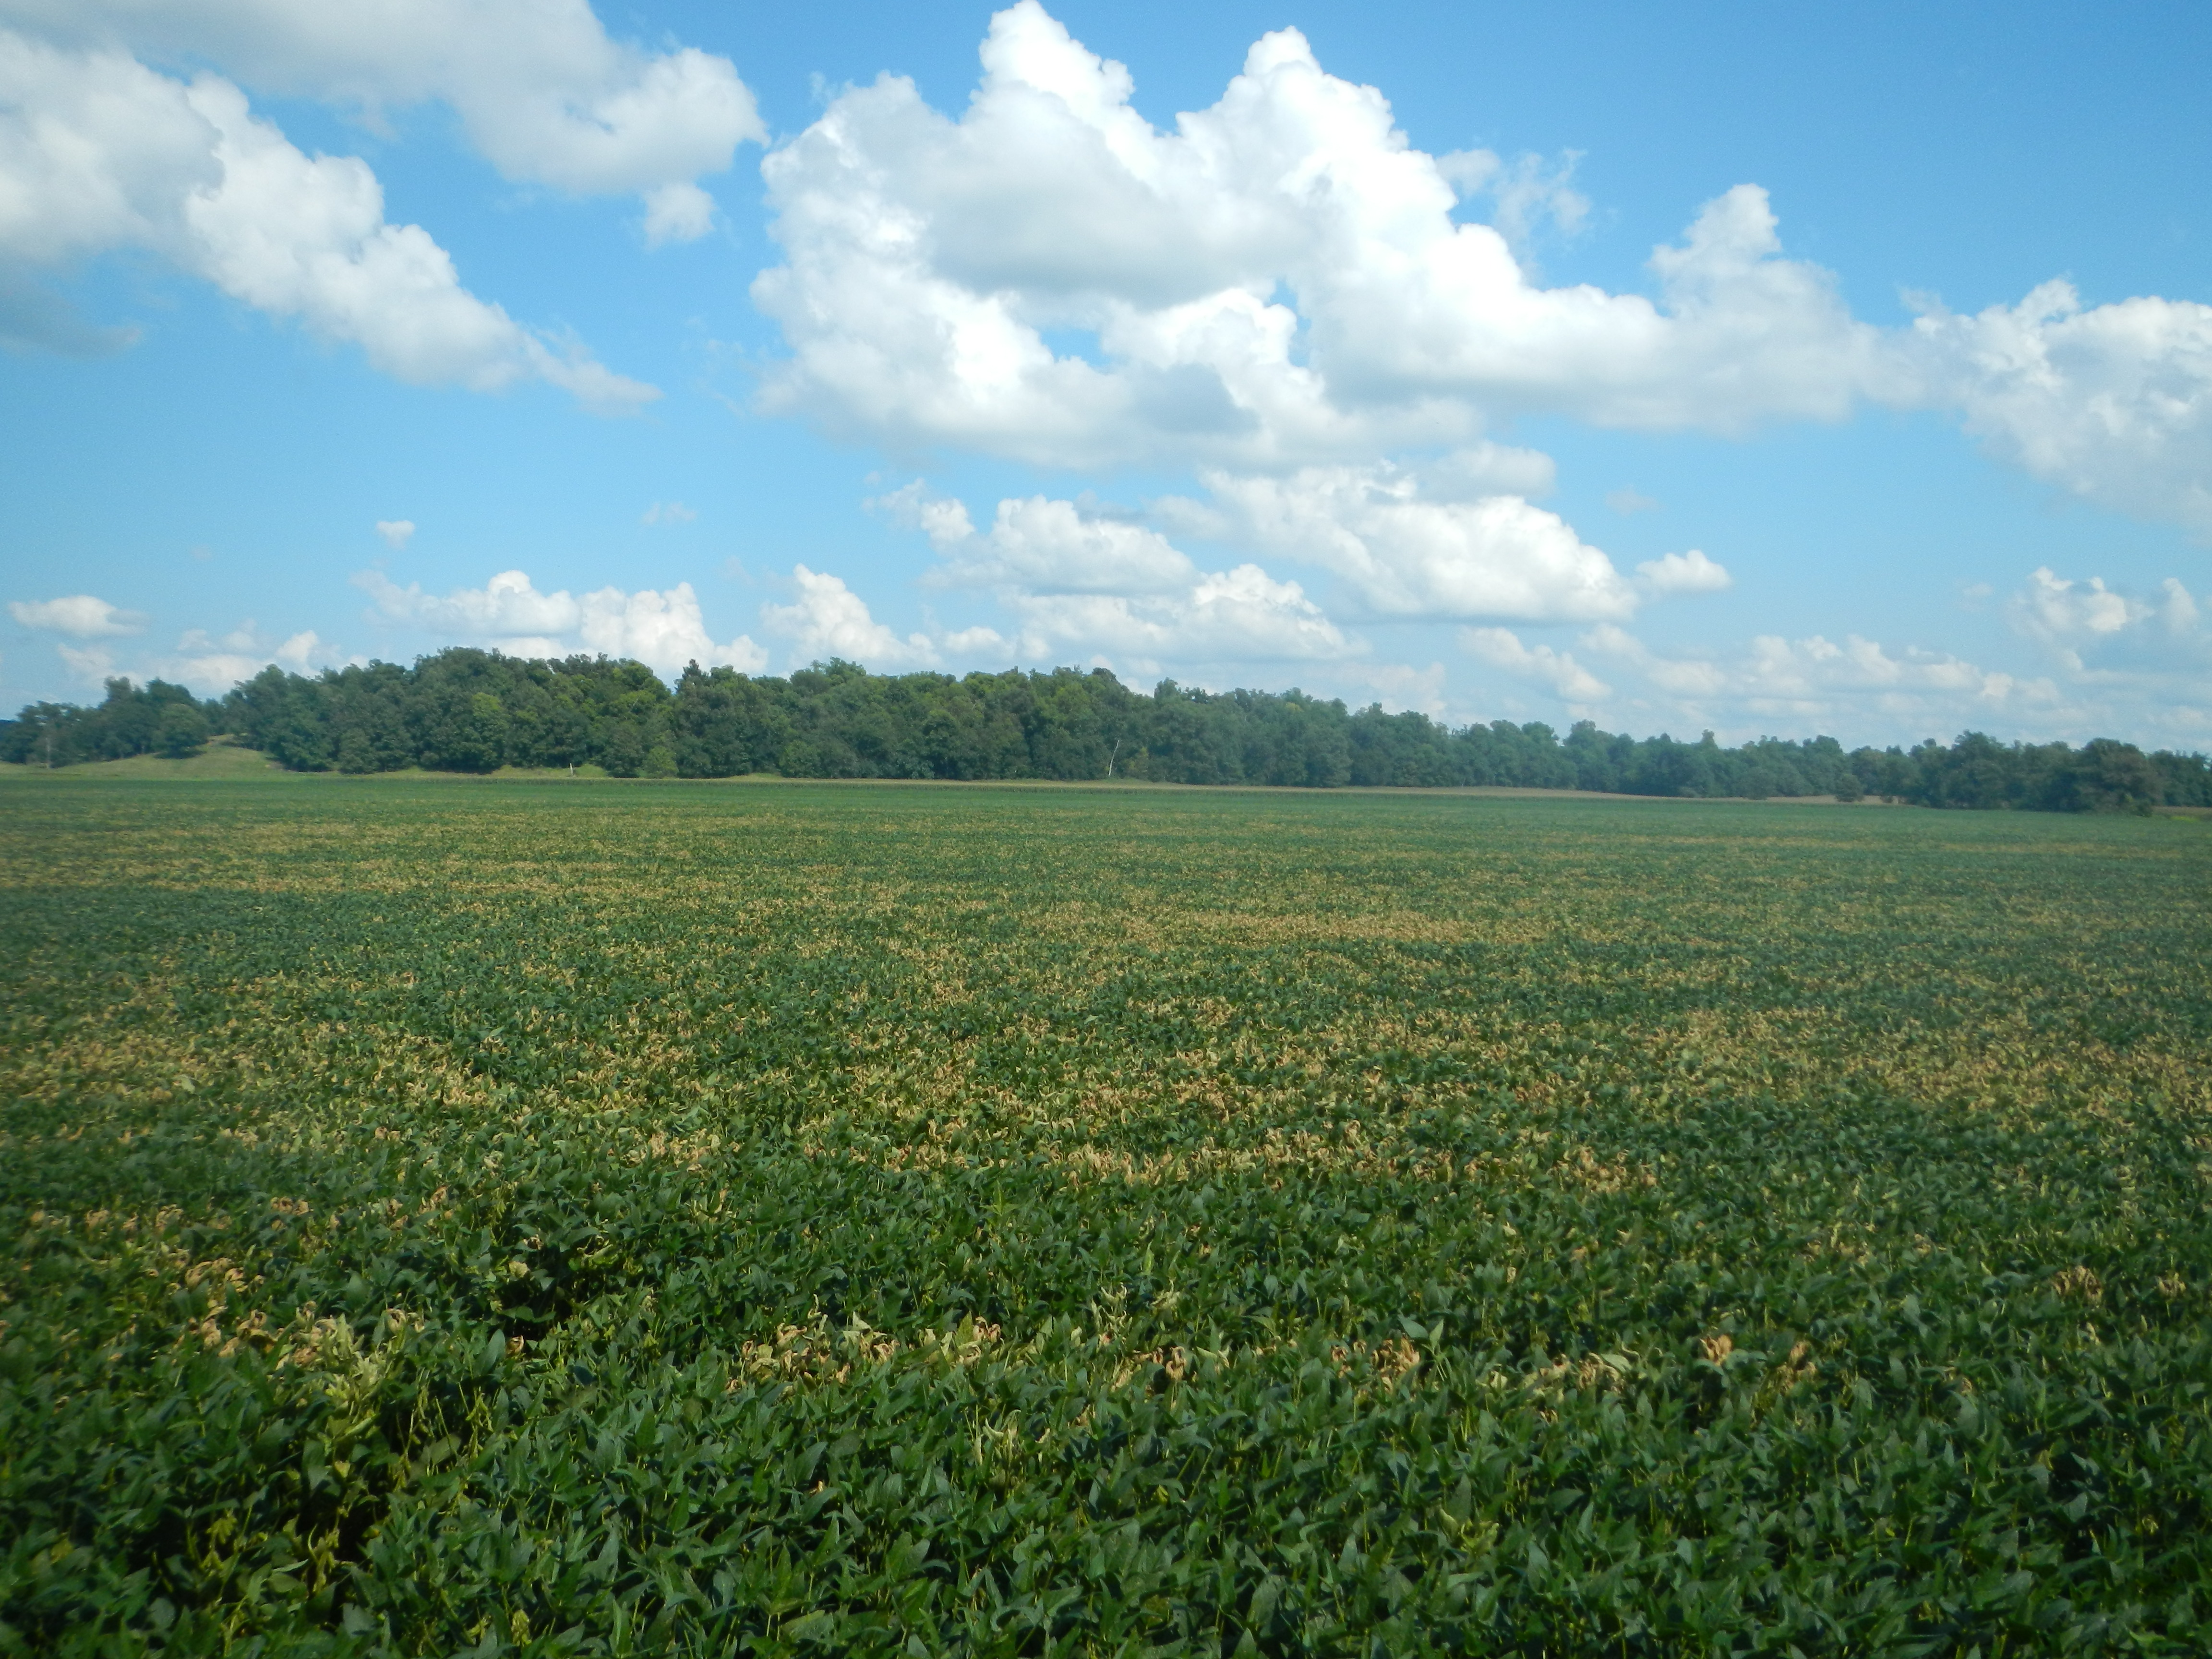 Sudden death syndrome can be visible as patches within a field.